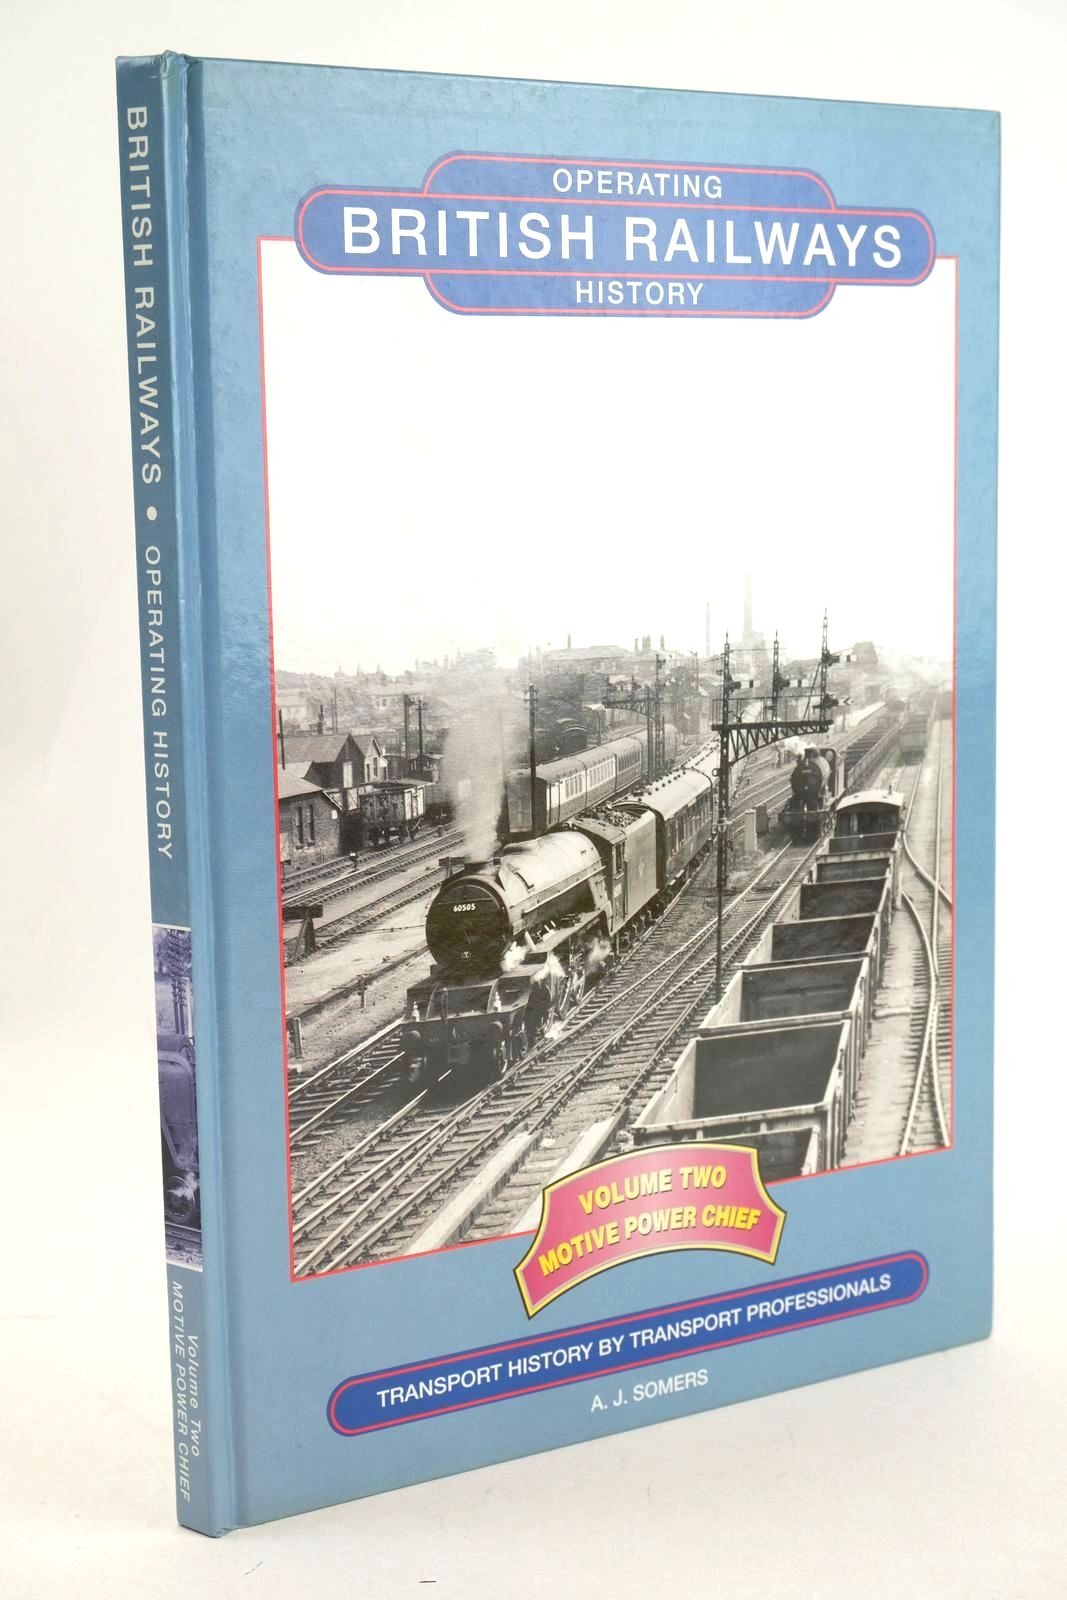 Photo of BRITISH RAILWAYS OPERATING HISTORY: VOLUME TWO MOTIVE POWER CHIEF written by Somers, A.J. published by Xpress Publising (STOCK CODE: 1327119)  for sale by Stella & Rose's Books